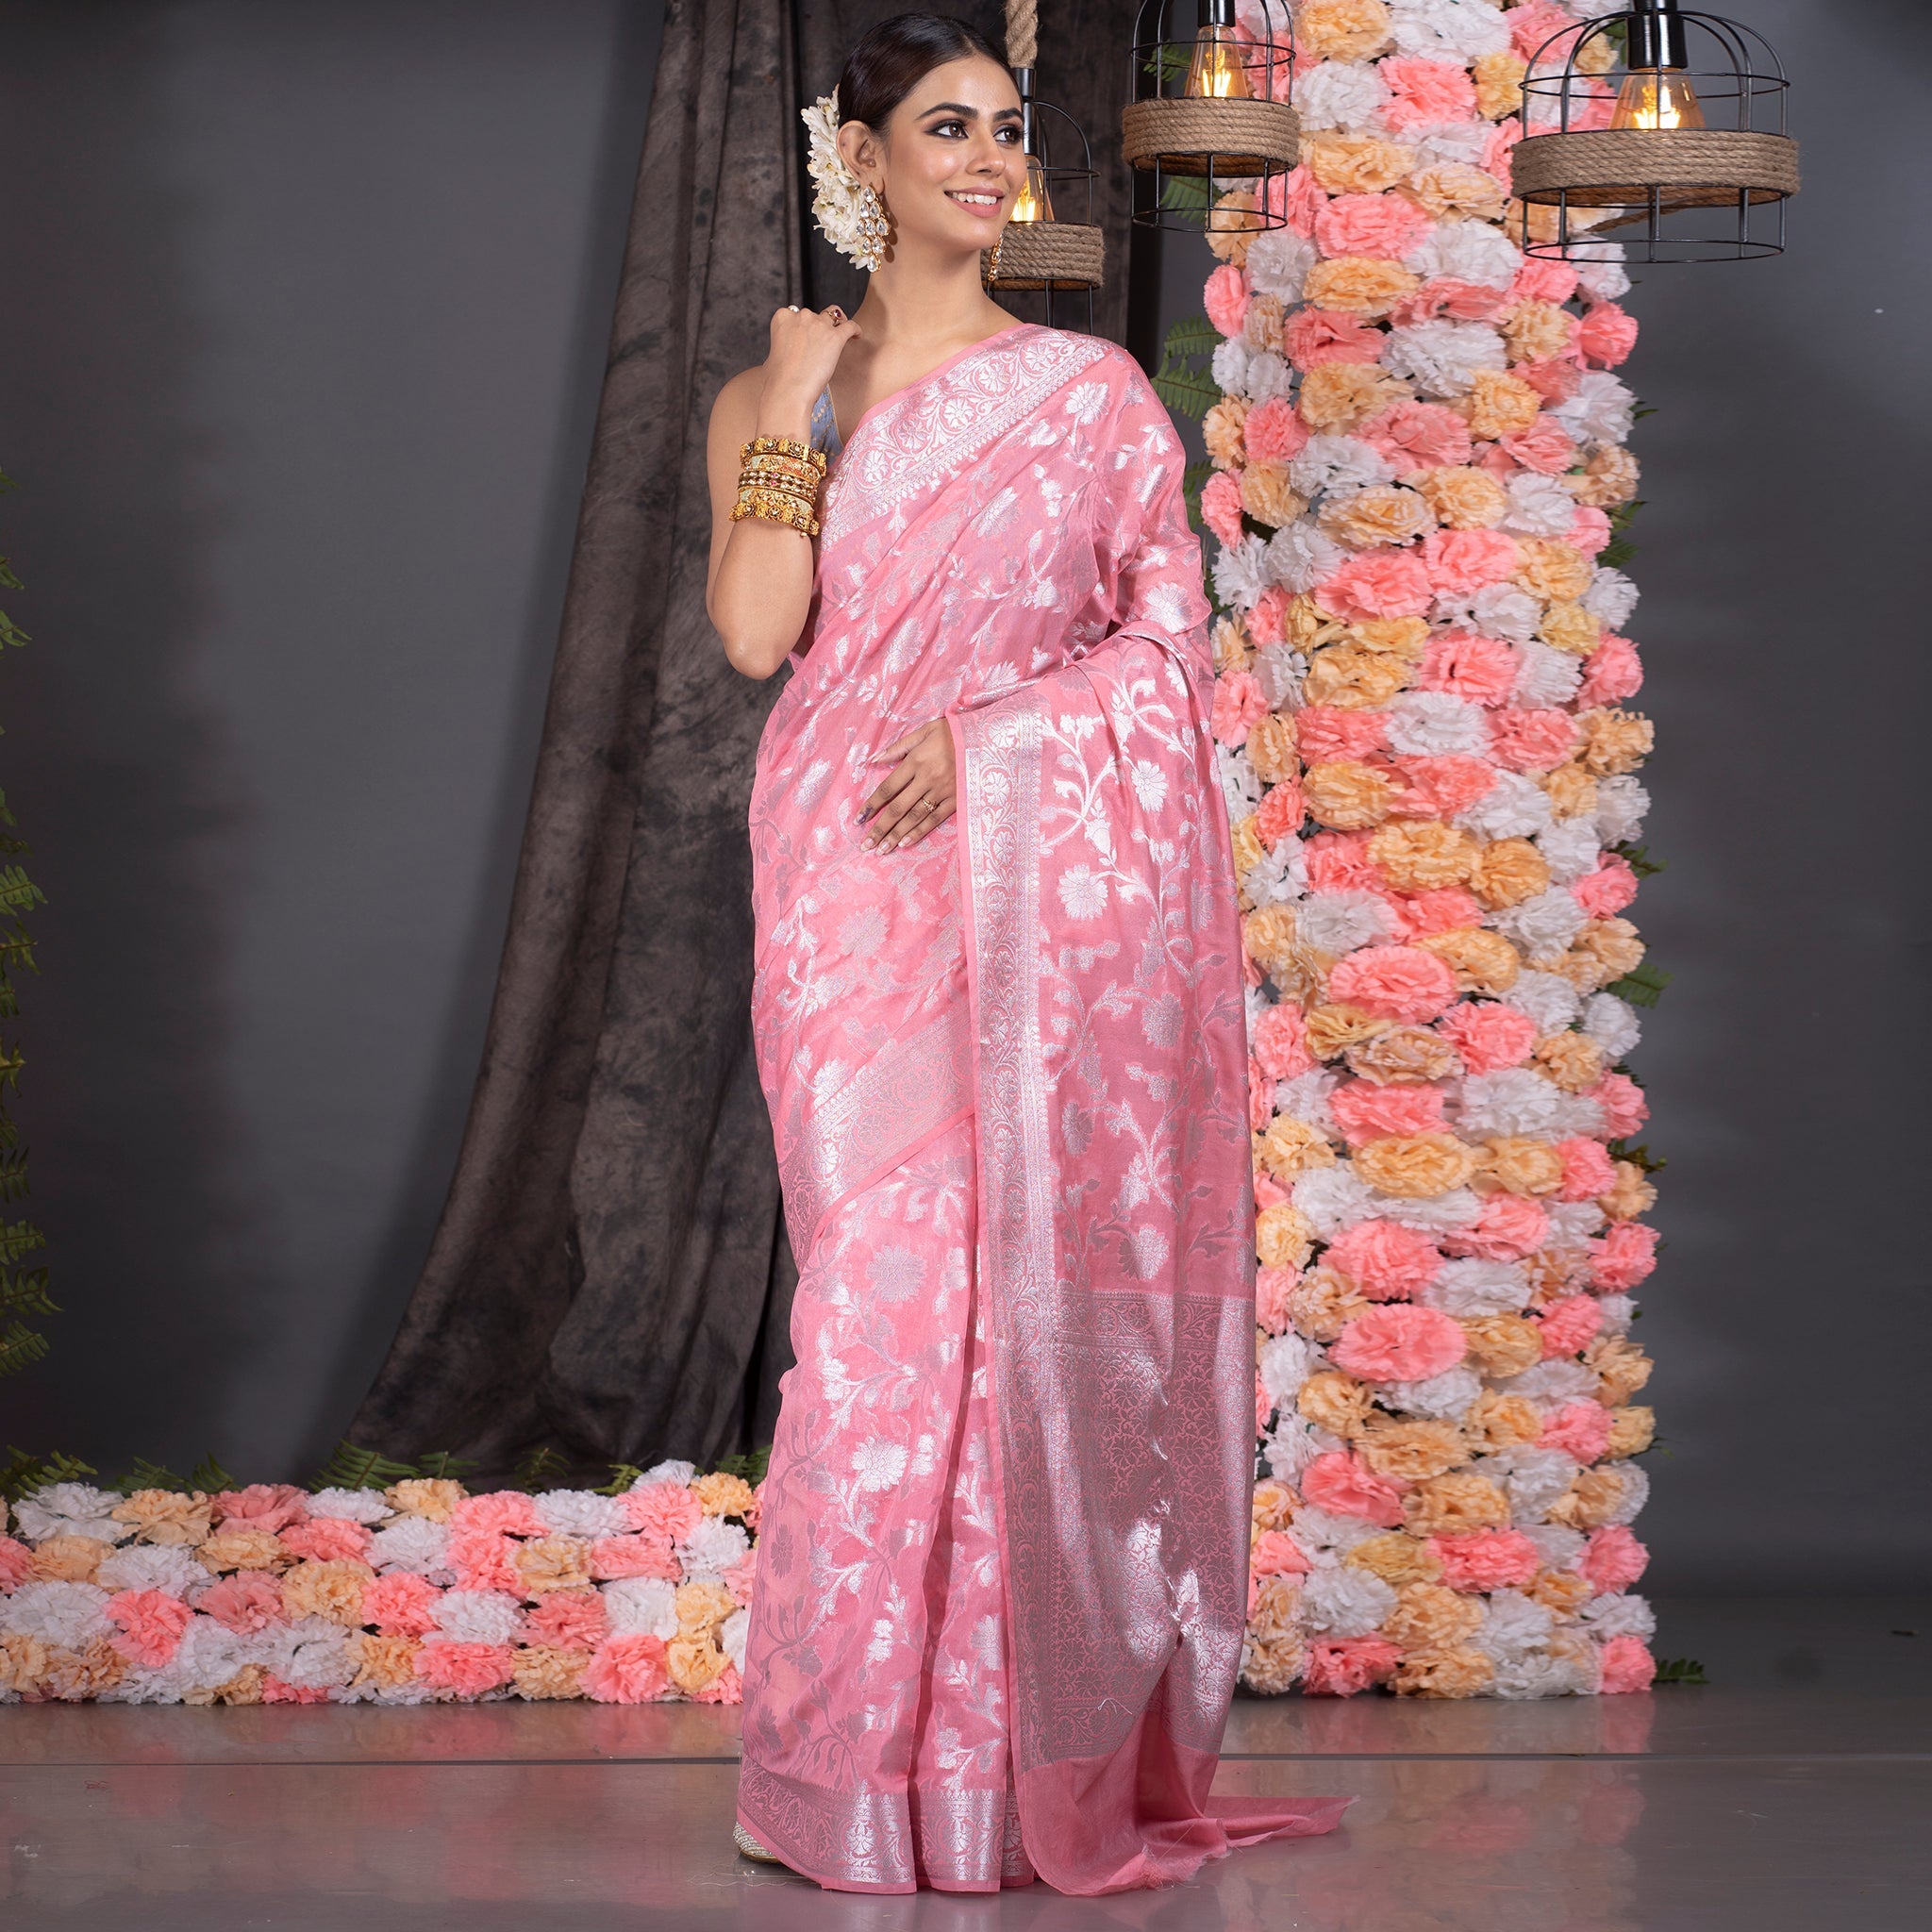 Women's Rose Pink Pure Georgette Saree With Antique Silver Jaal Border And Pallu - Boveee